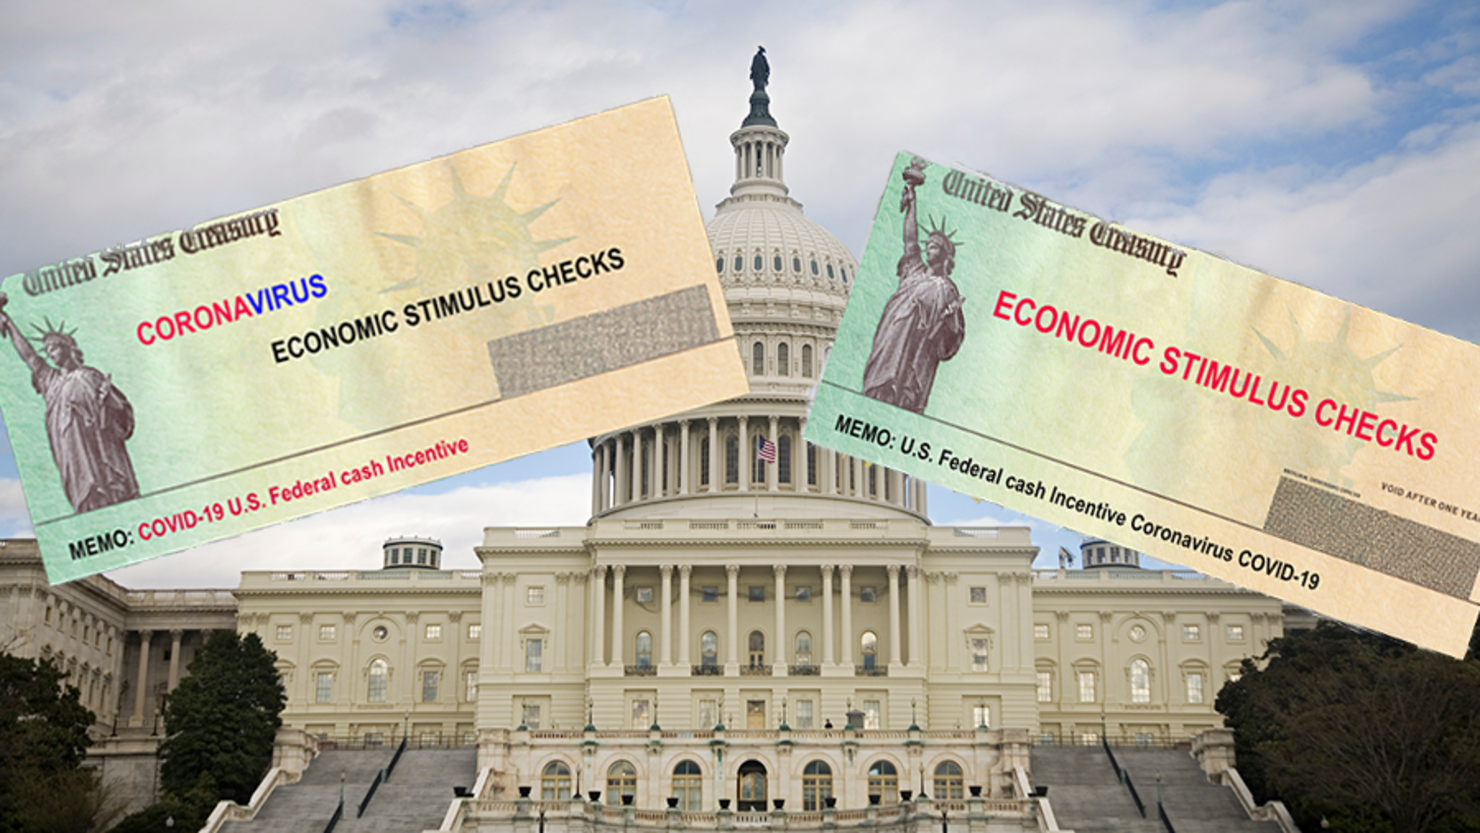 UPDATED New Stimulus Package Expected Today Here's What Will Be In It